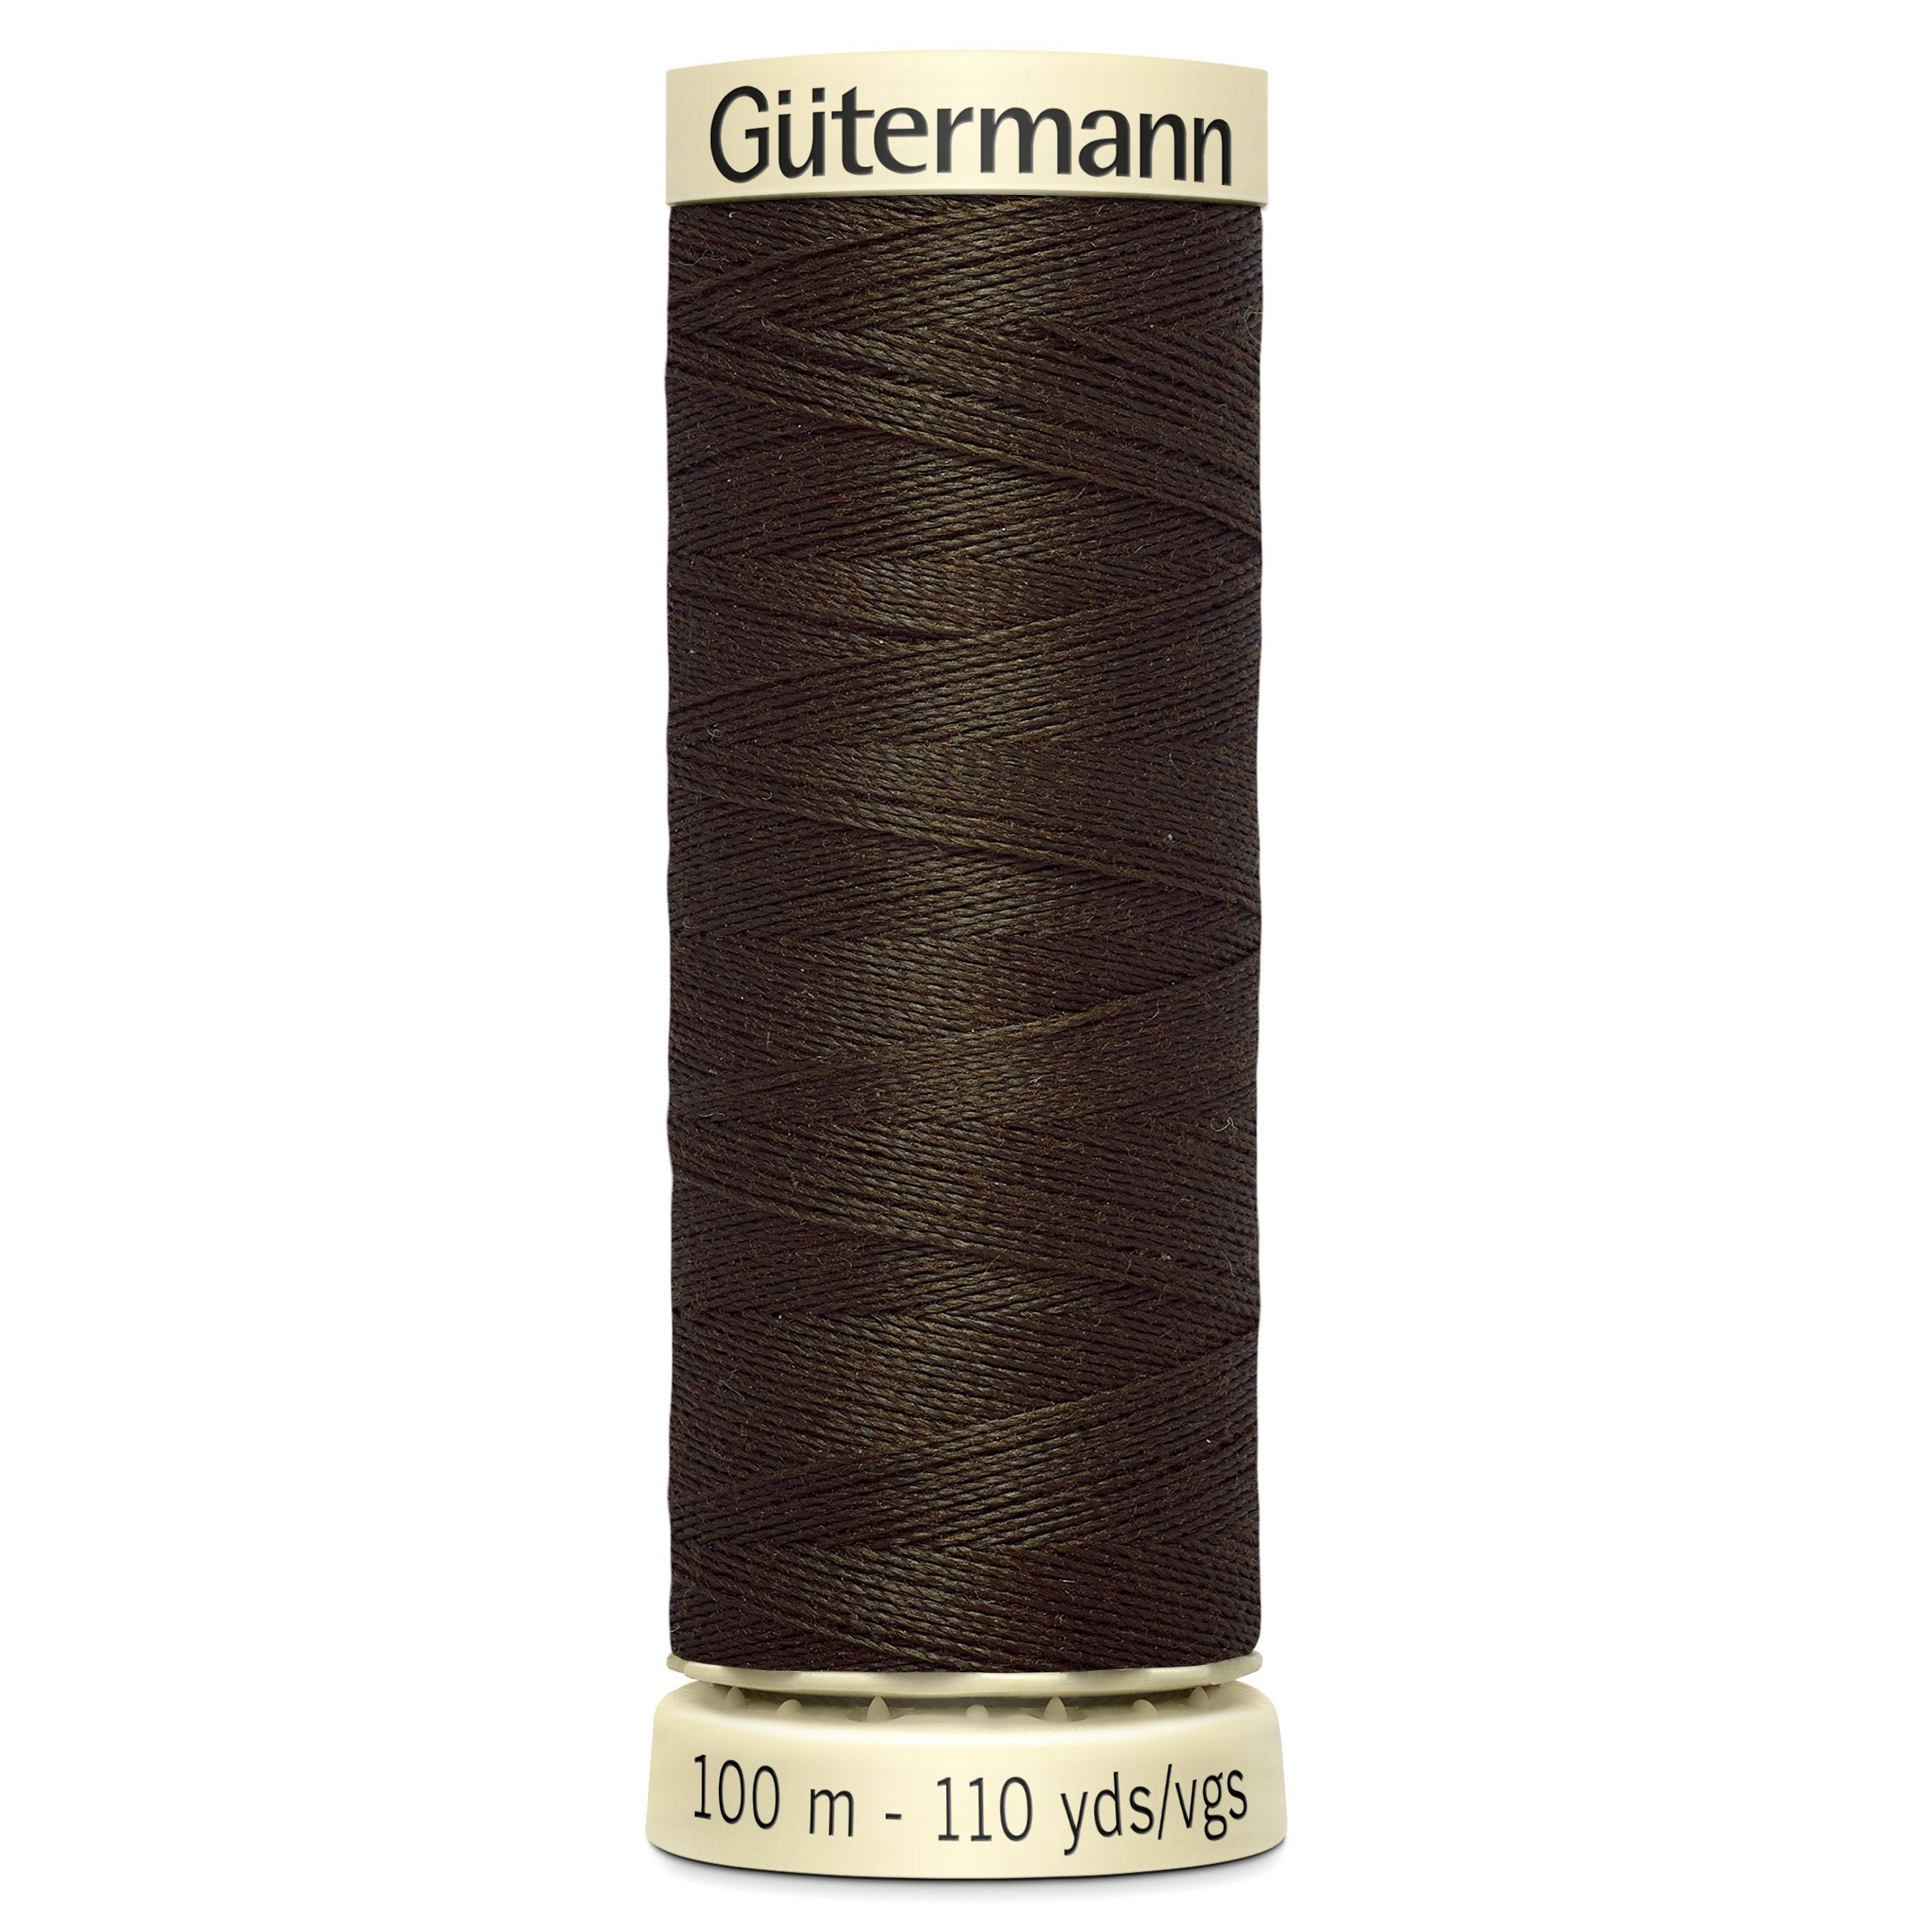 Gutermann Sew-All Polyester Sewing Thread 21 Dark Brown from Jaycotts Sewing Supplies